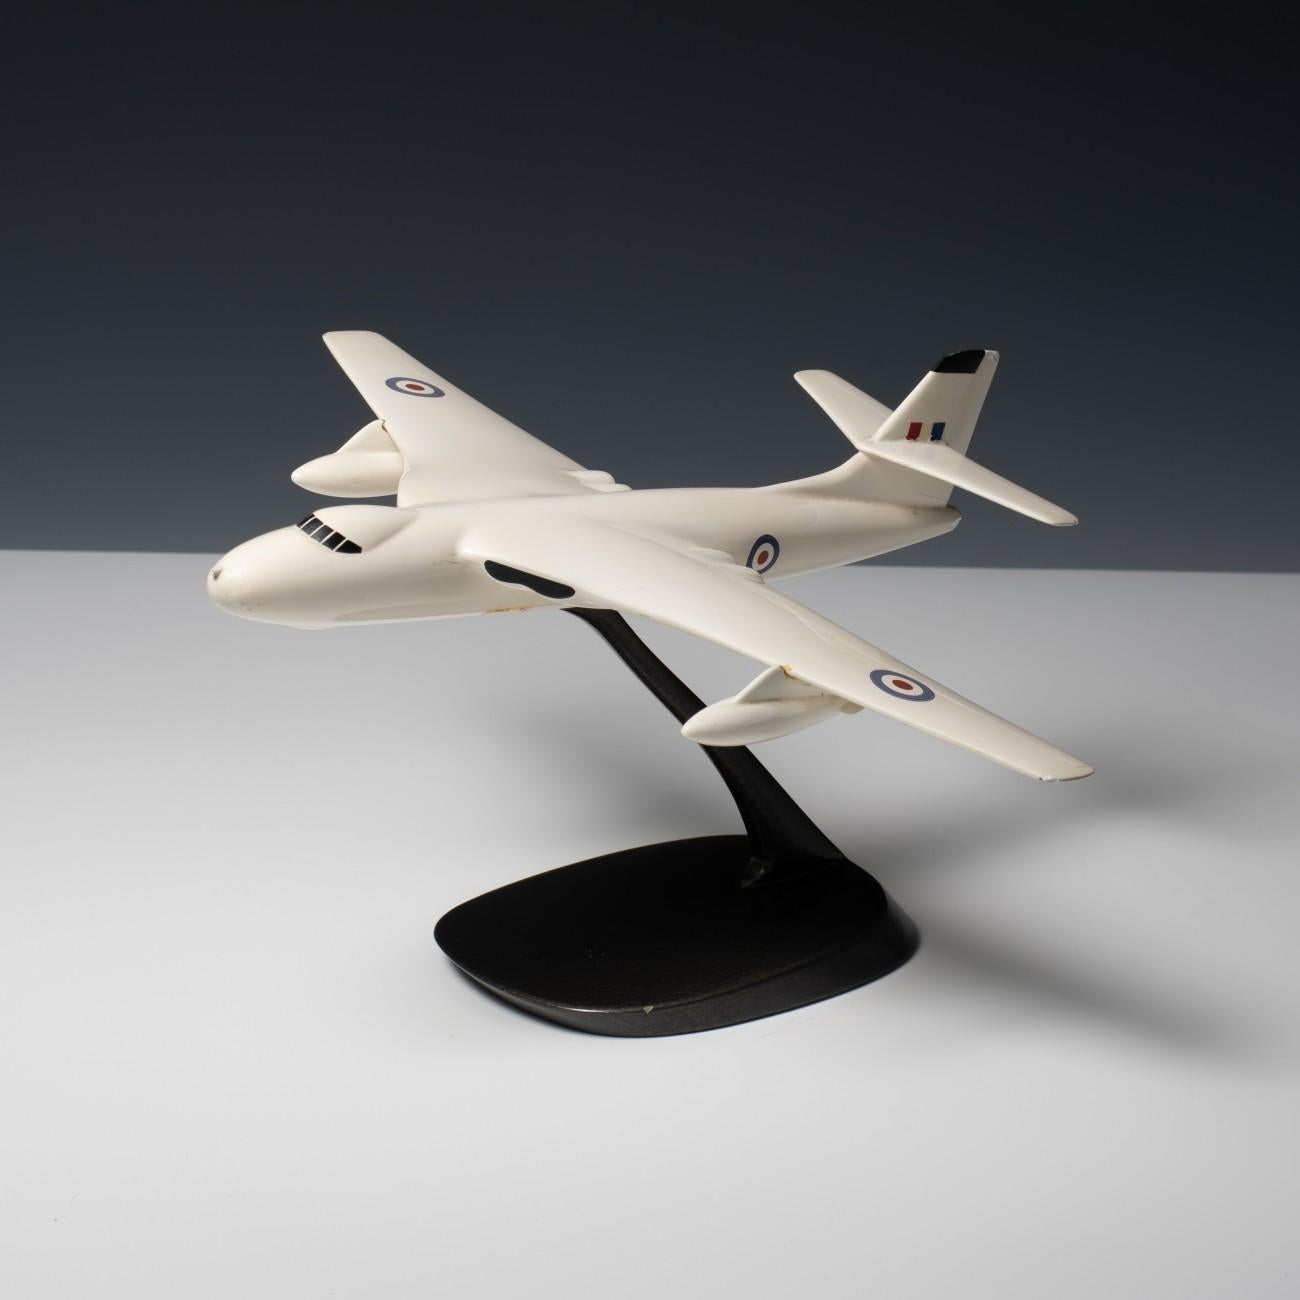 Magnificent painted cast metal alloy Vickers Valliant ‘V’ bomber in RAF ‘anti-flash white’ livery, on original stand. By the renowned UK model making firm of Westway Models, circa 1955.

Dimensions: 27.5 cm/10? inches (length) x 29.5 cm/11? inches